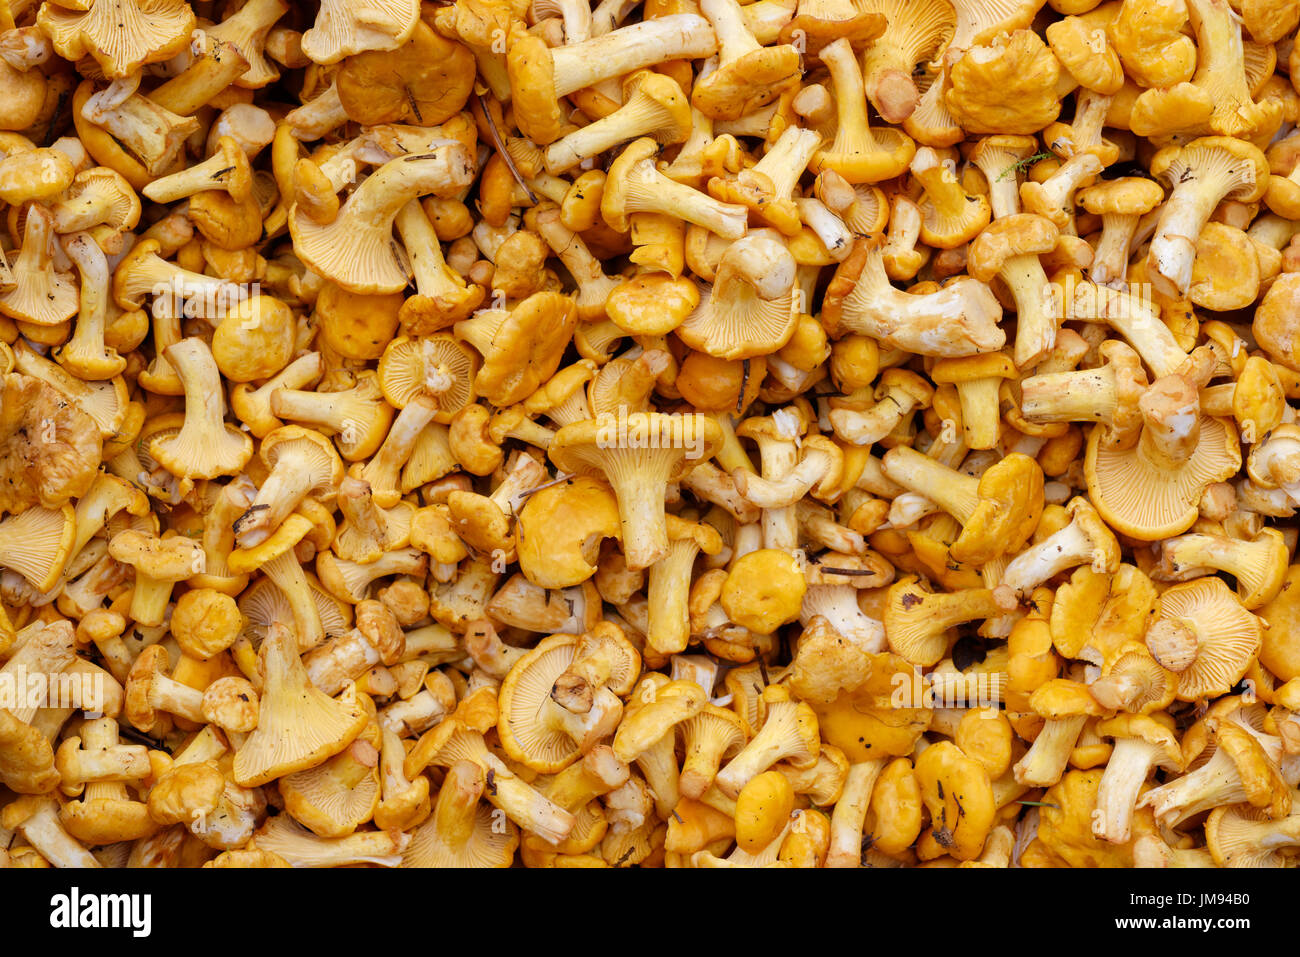 Backgrounds and textures: a lot of fresh raw girolles, yellow forest mushrooms Stock Photo